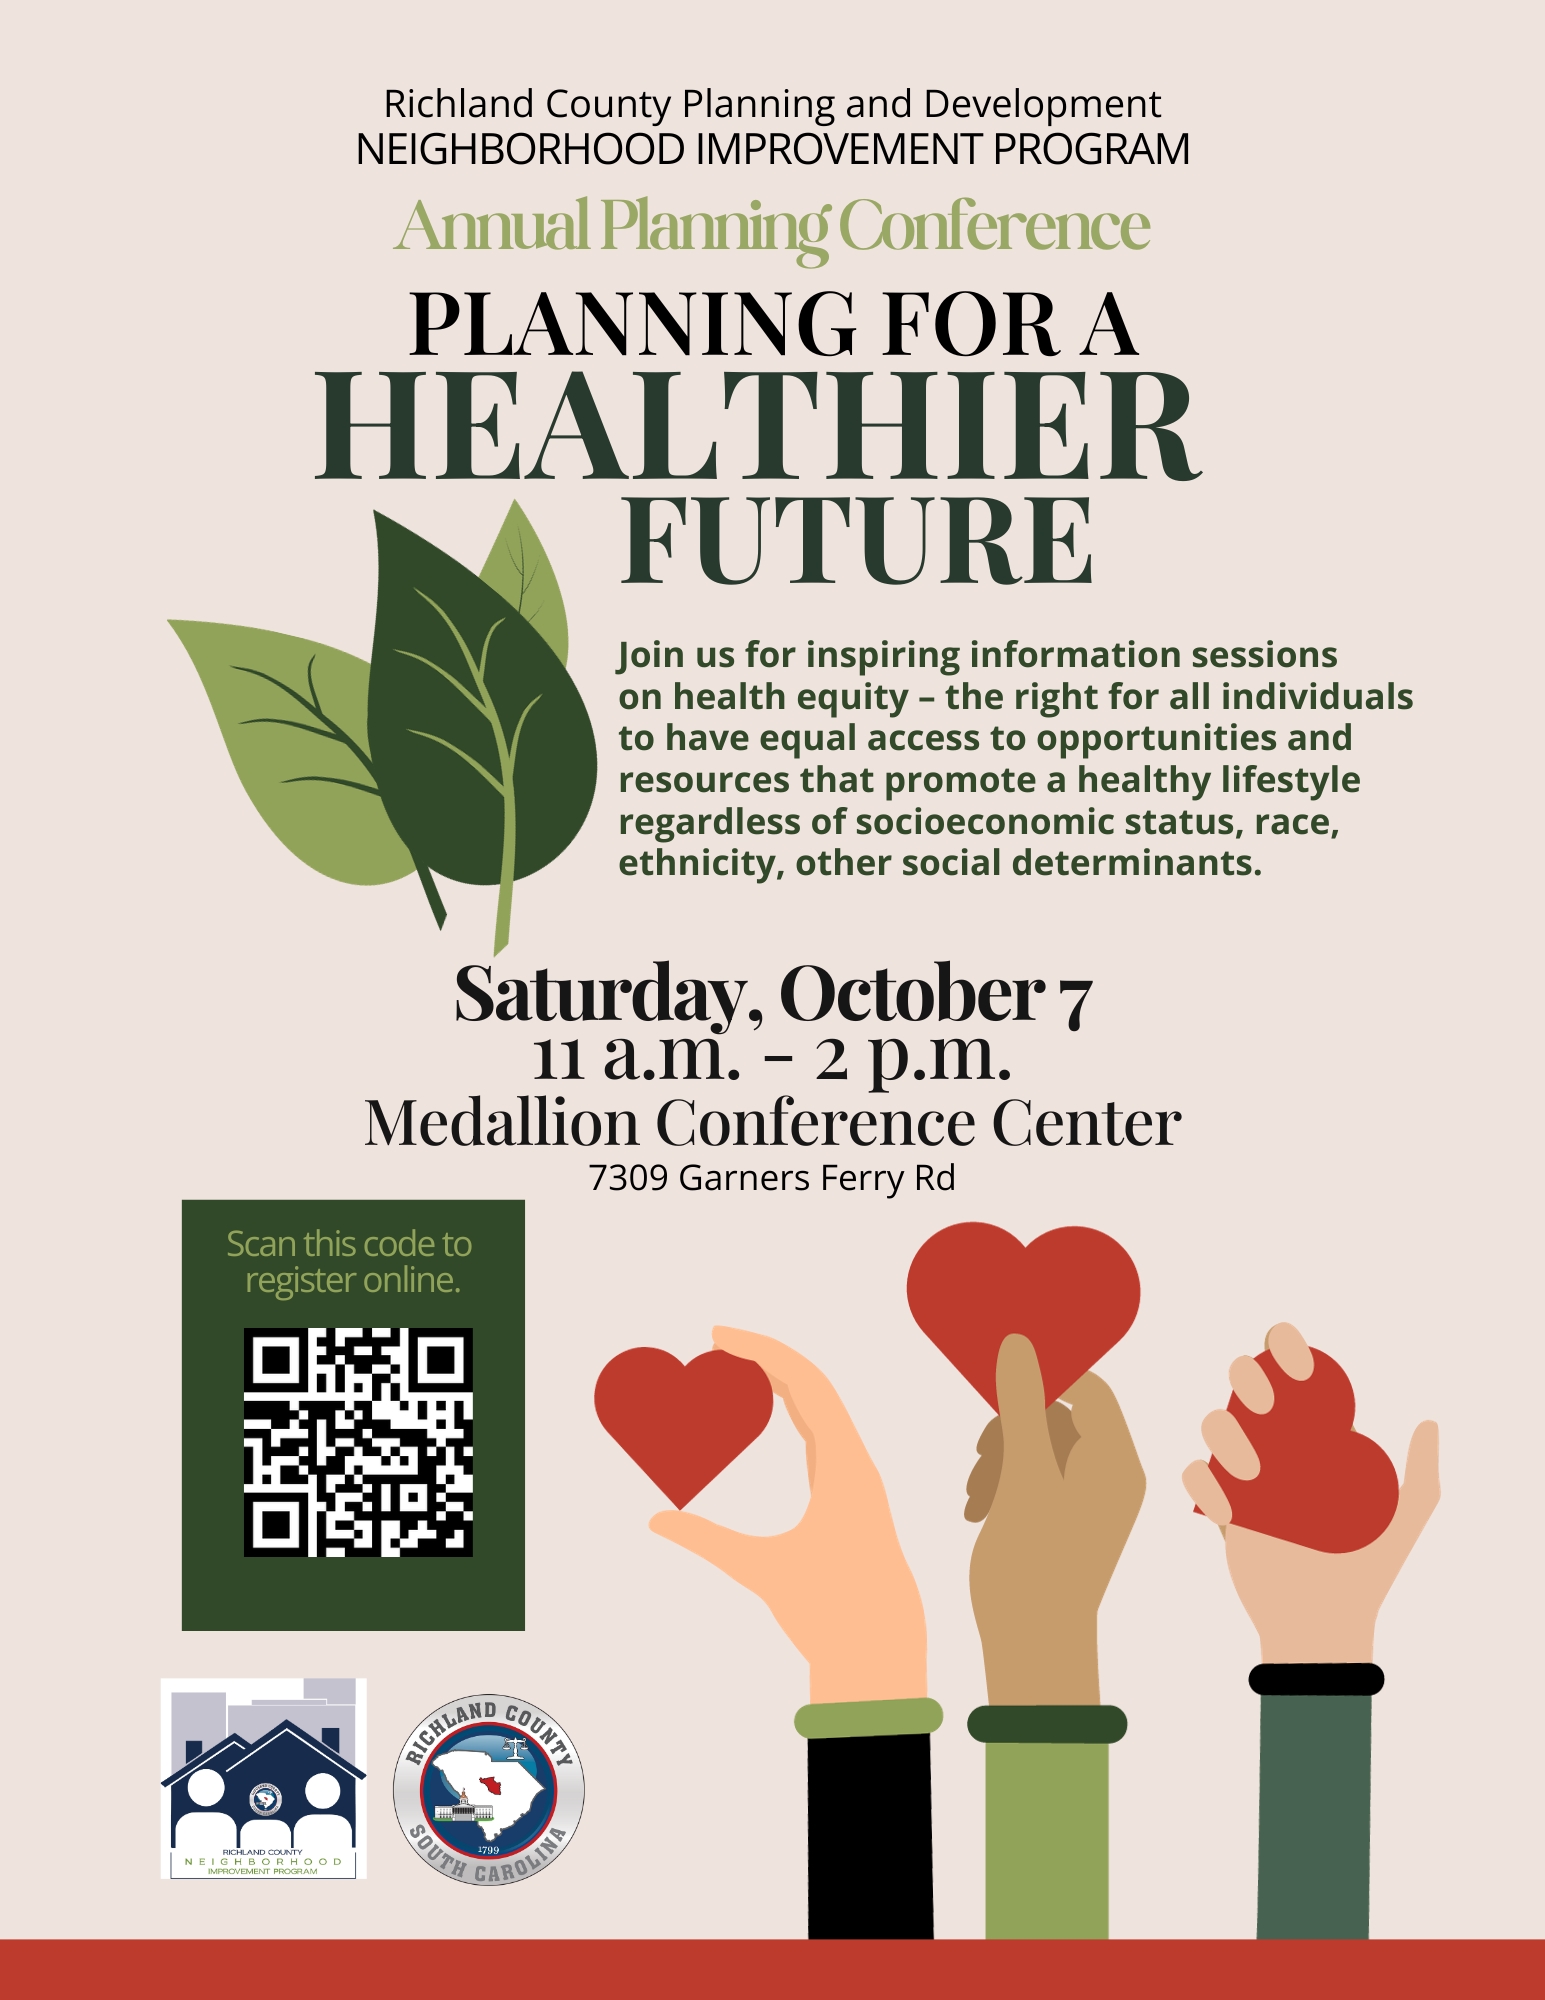 NIP Annual Planning Conference: Planning for a Healthier Future